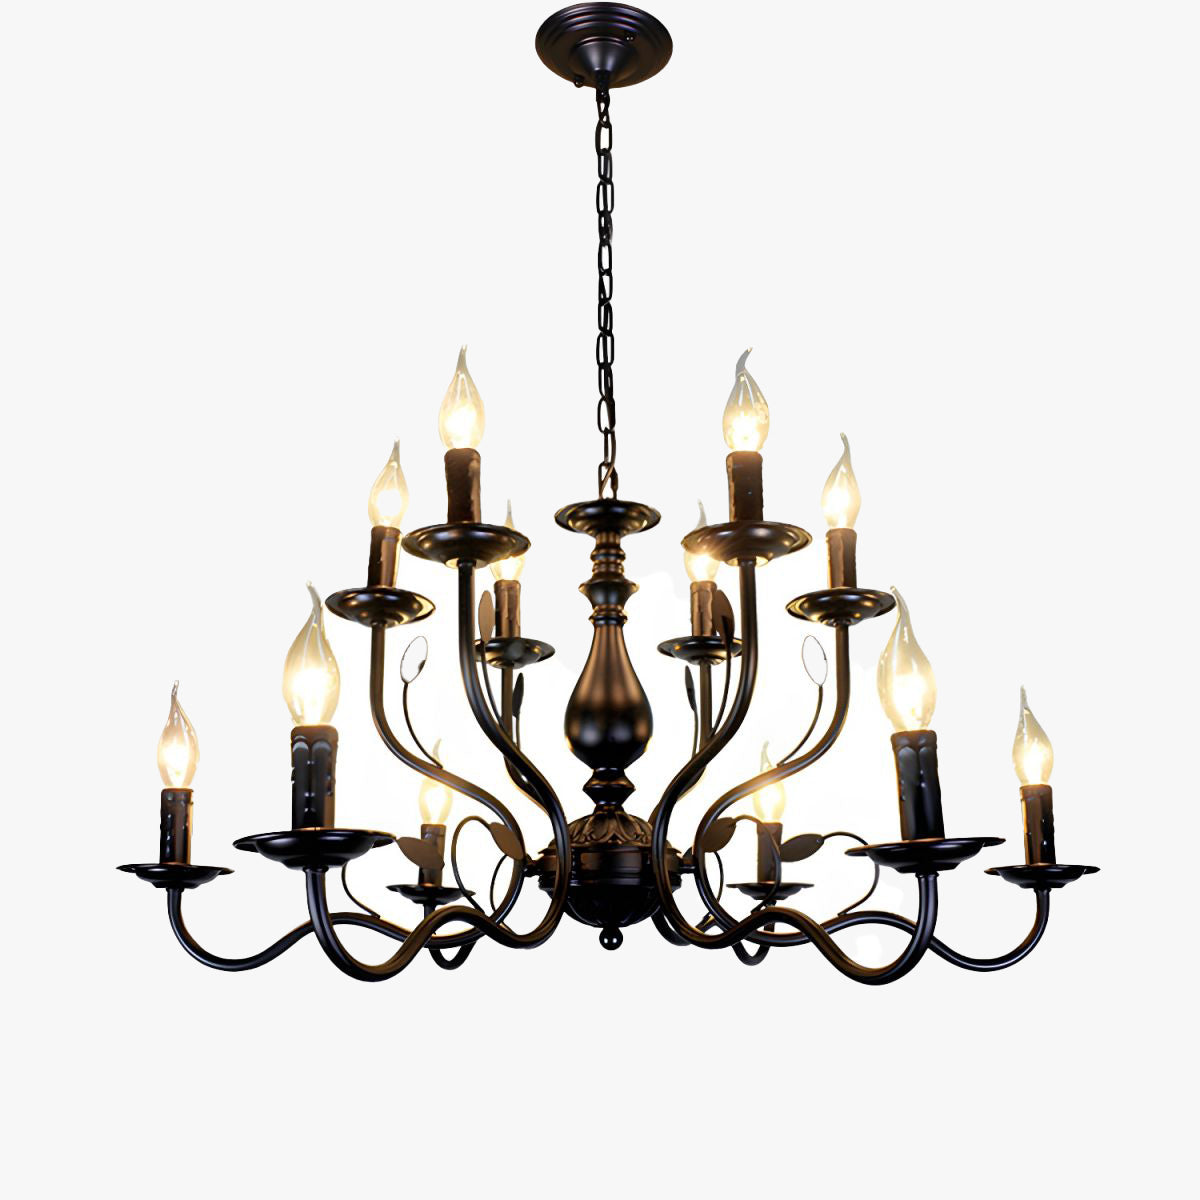 Silva Transitional Candle Chain Chandelier, Black